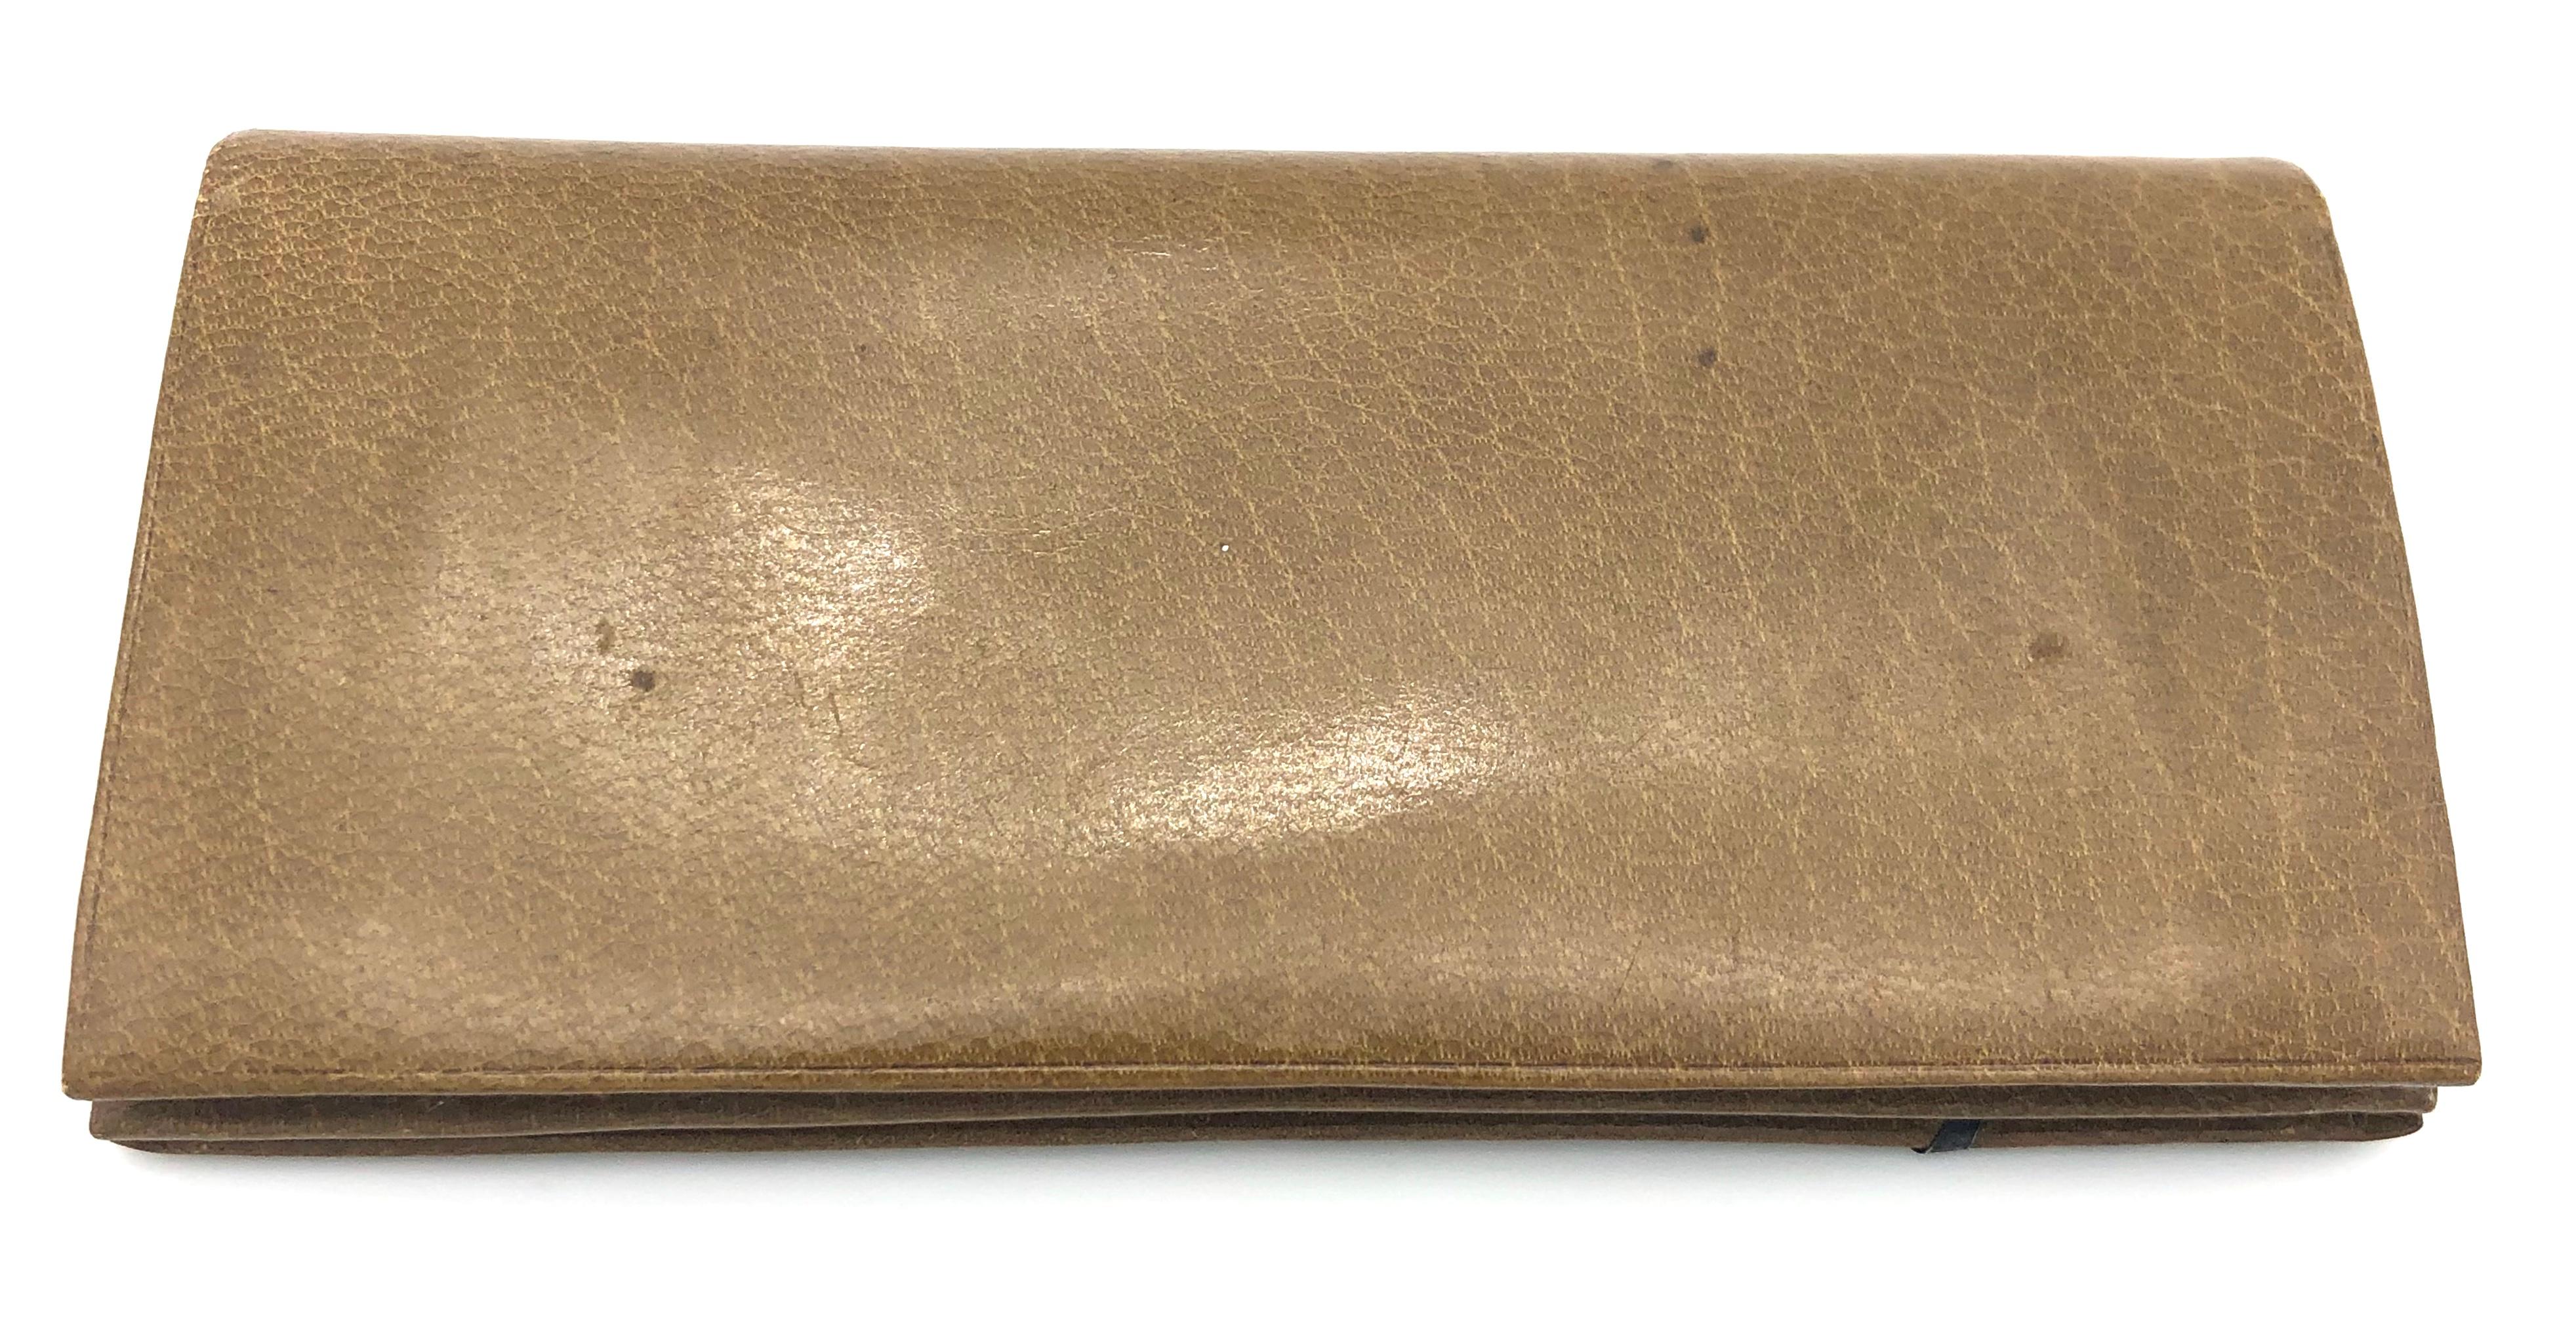 Antique beige calf leather foldable flap wallet in a landscape format decorated with a silver holly berry leave. It has a coin pouch with a clasp closure, as well as bill compartments. It is embossed 